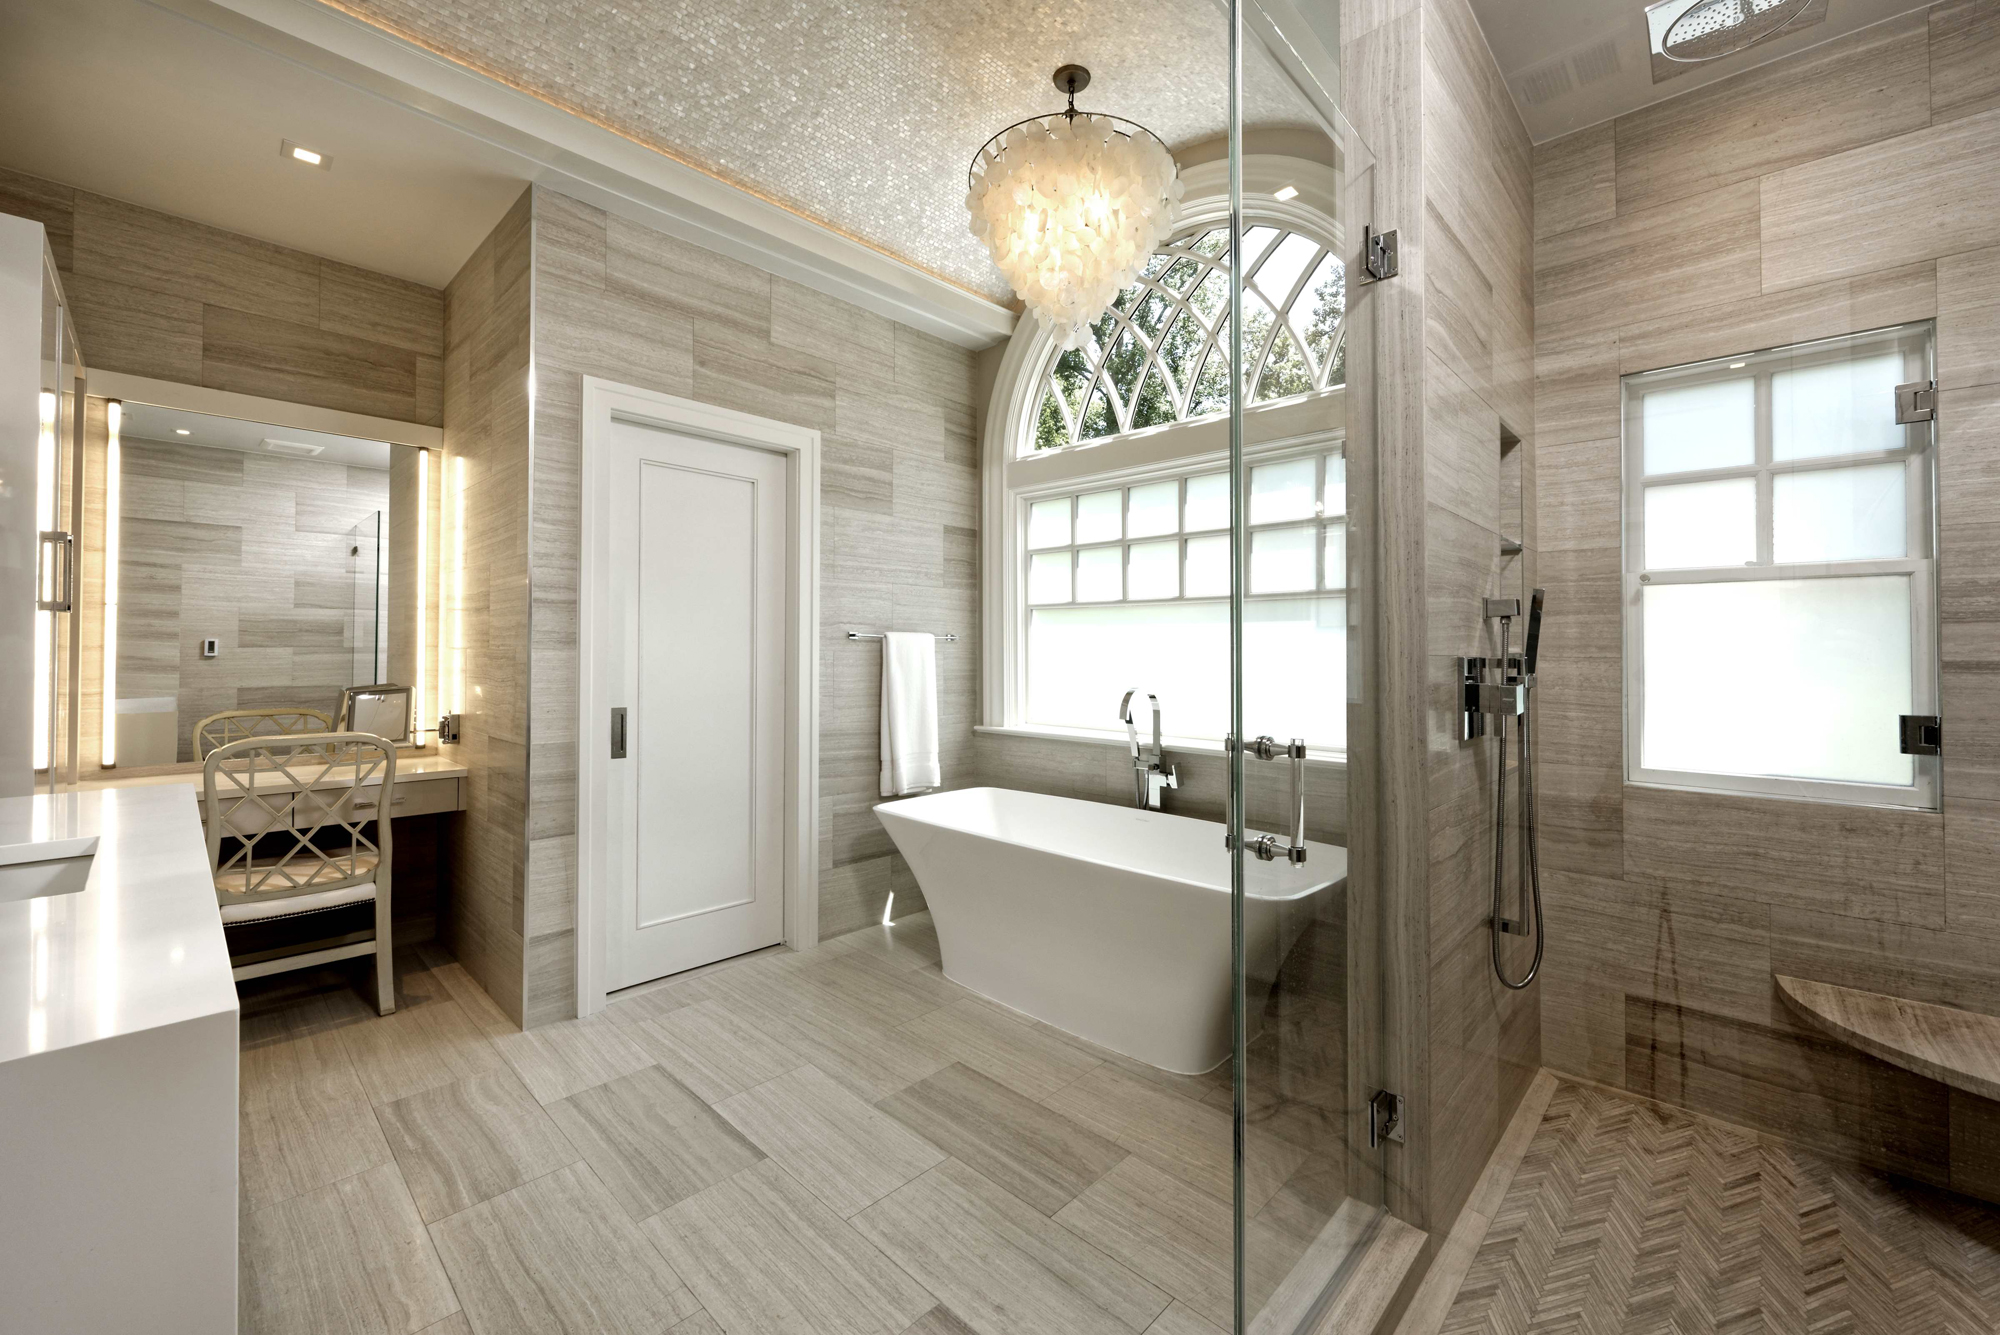 kitchen and bath remodeling pro